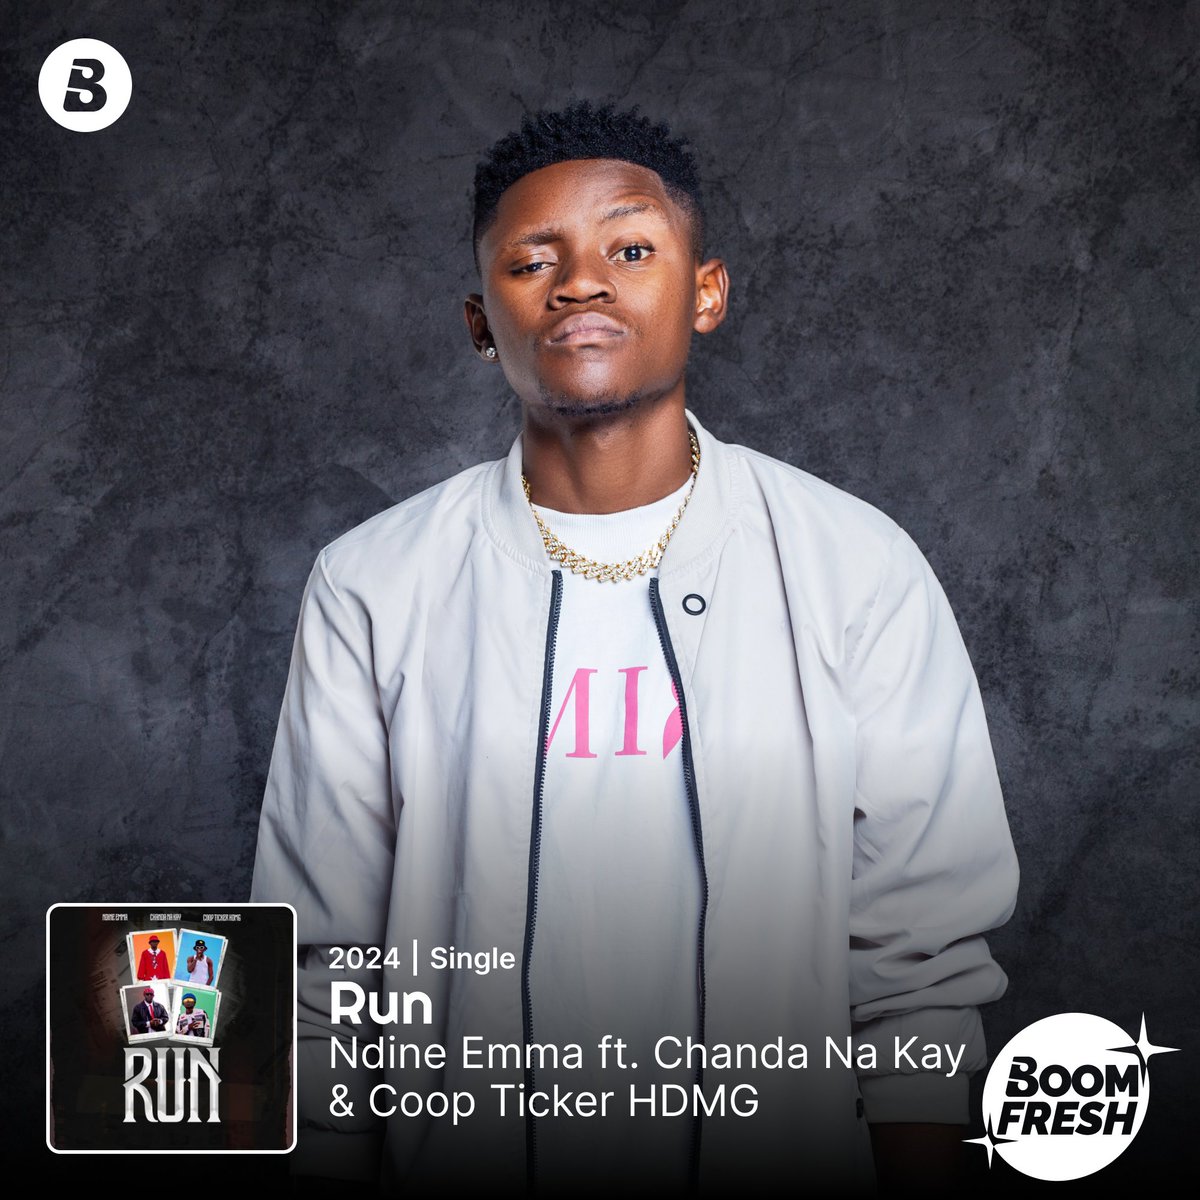 BOOMFRESH!🔥 New single #Run by @ndineemma ft. #ChandaNaKay & Coop Ticker HDMG is now going viral on Boomplay！🔁 Stream it on repeat: Boom.lnk.to/NdineEmmaRun ▶ #BoomFresh #NdineEmma #Boomplay #ChandaNaKay #CoopTickerHDMG